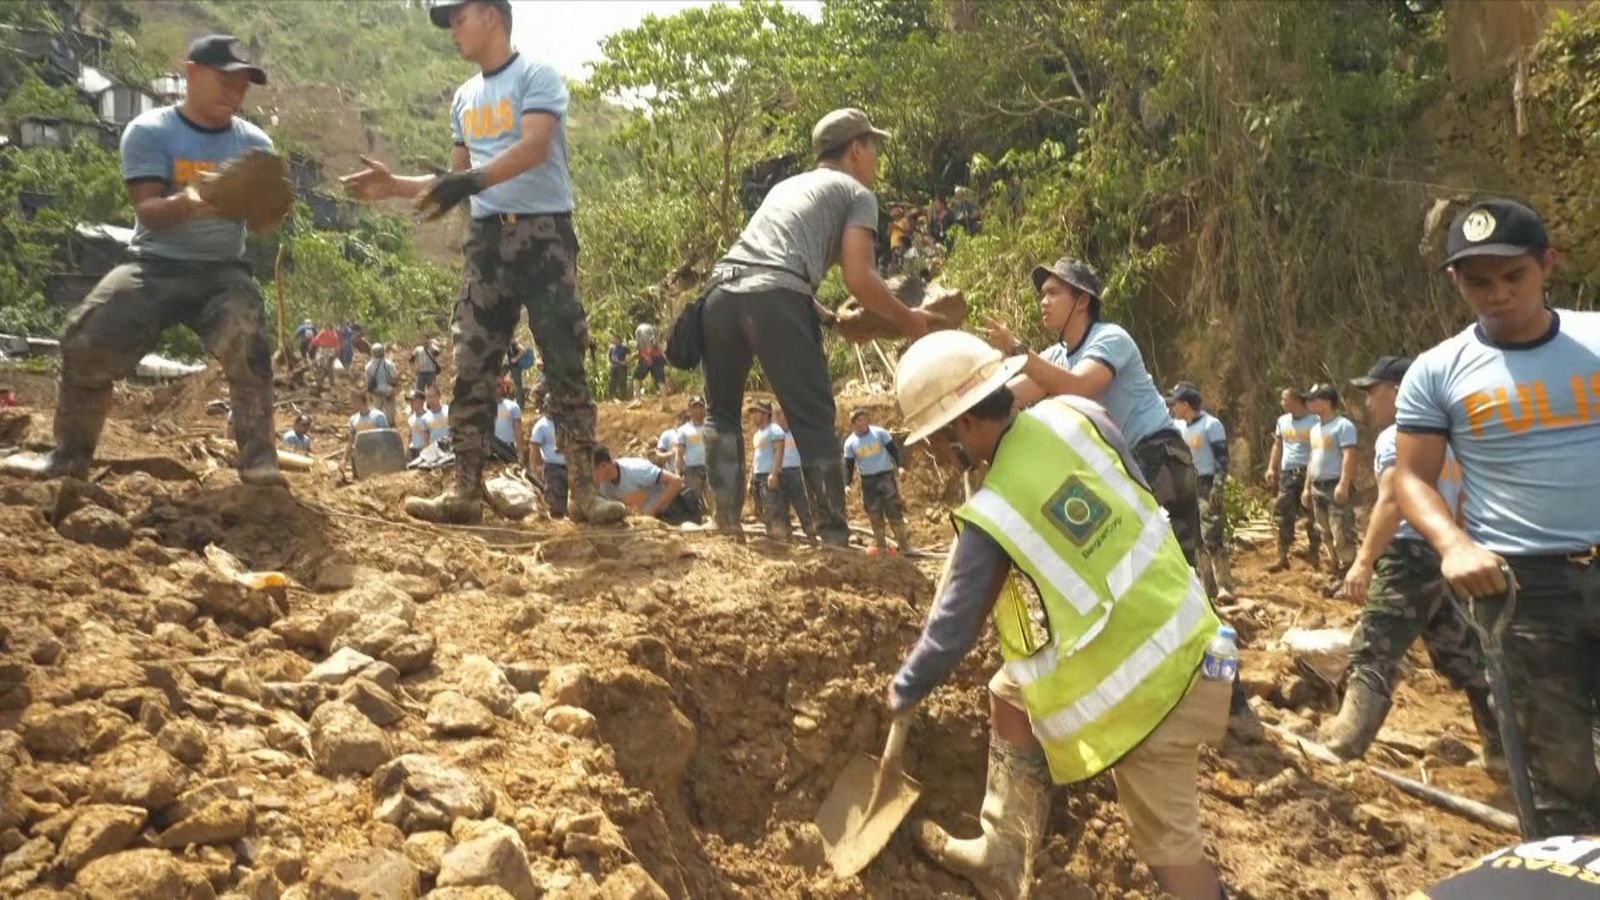 Dozens trapped after landslide in Philippines | News UK Video News ...